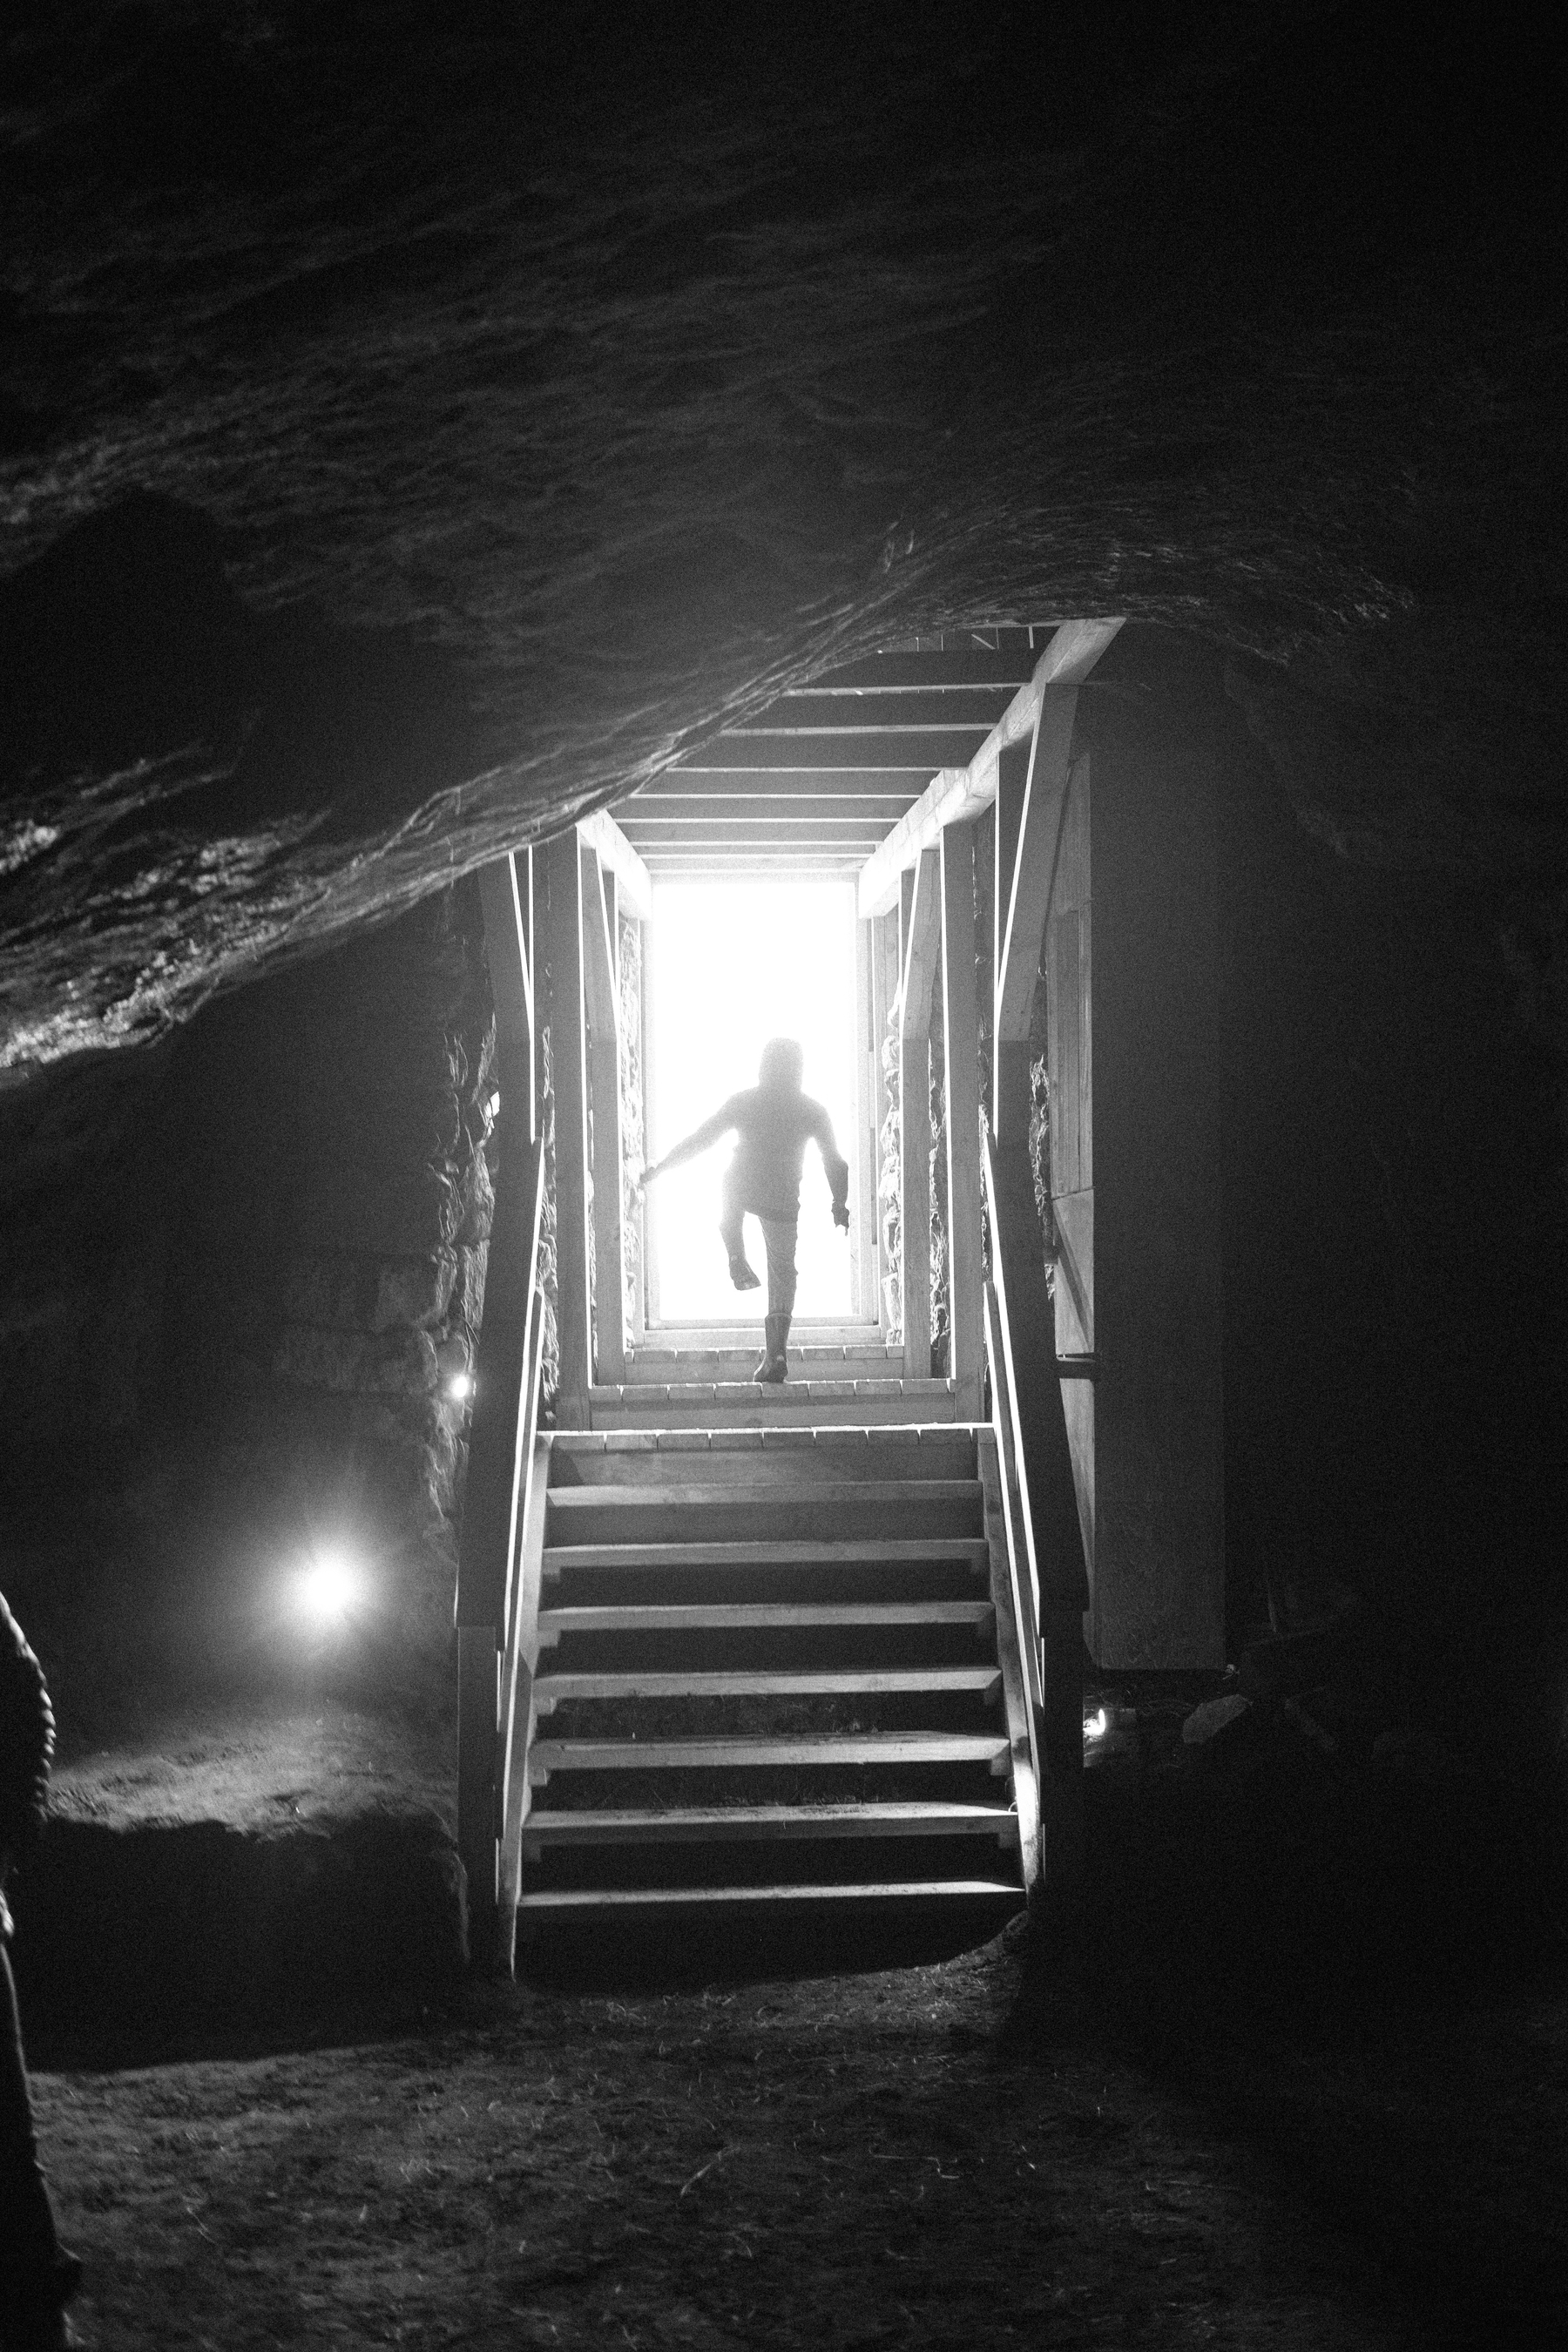 The silhouette of a kid exiting the cave